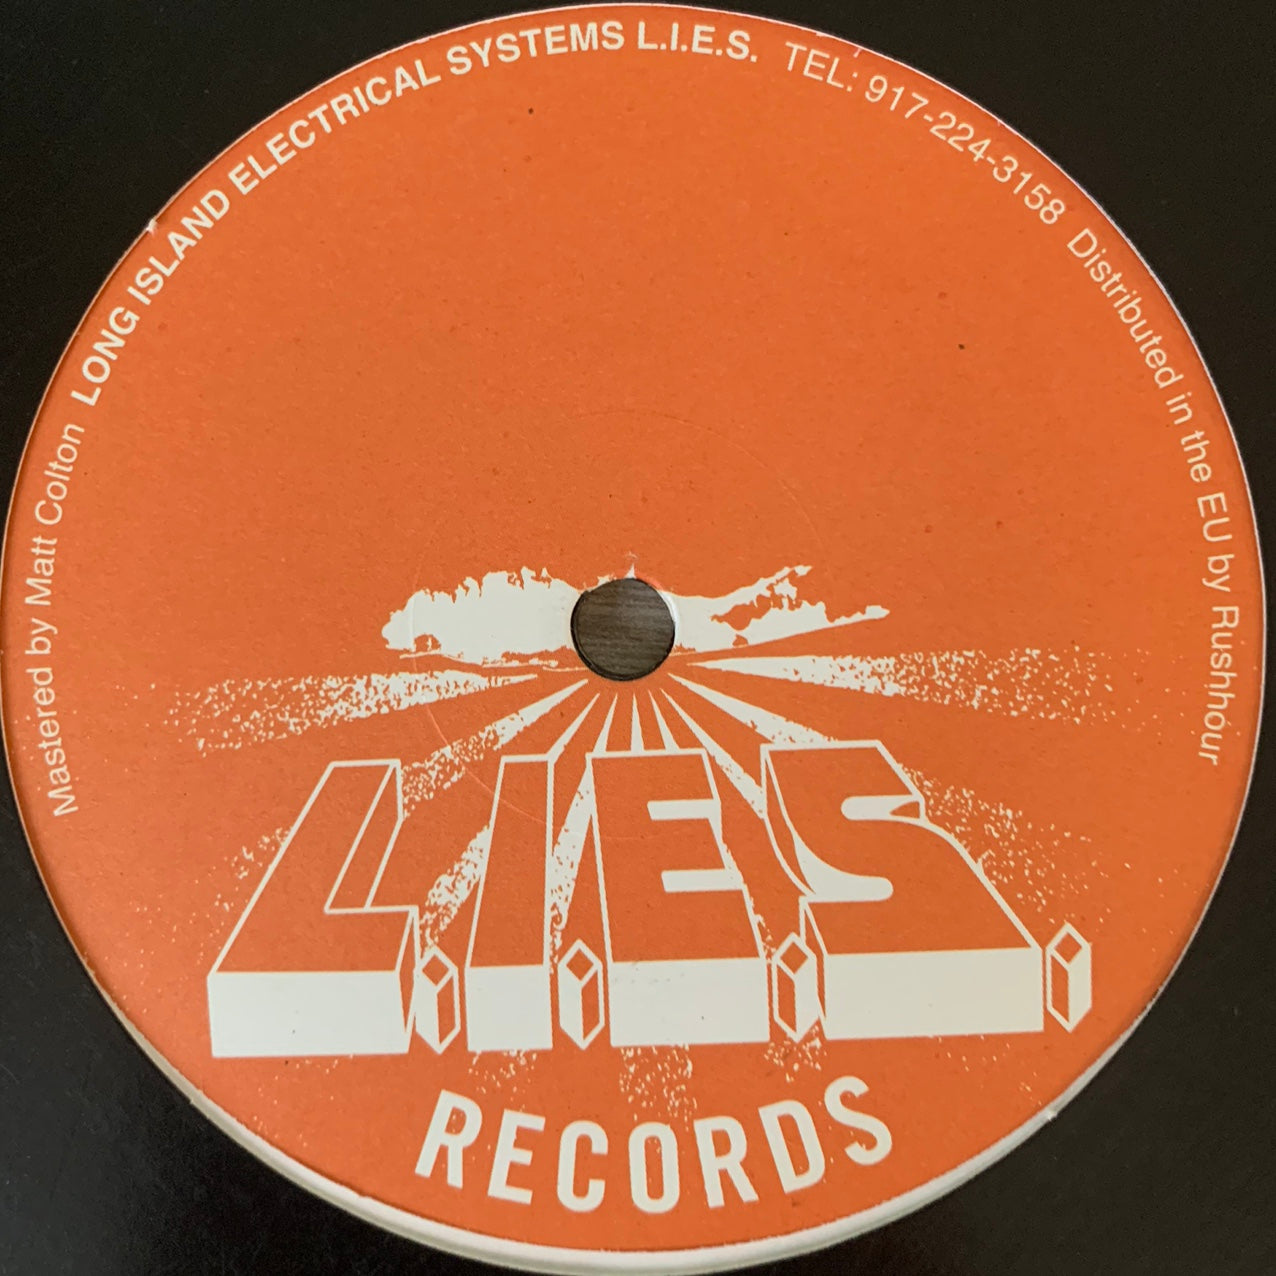 Bookworms “Malfunction” on Long Island Electrical System’s L.I.E.S. Records 3 Track 12inch Vinyl